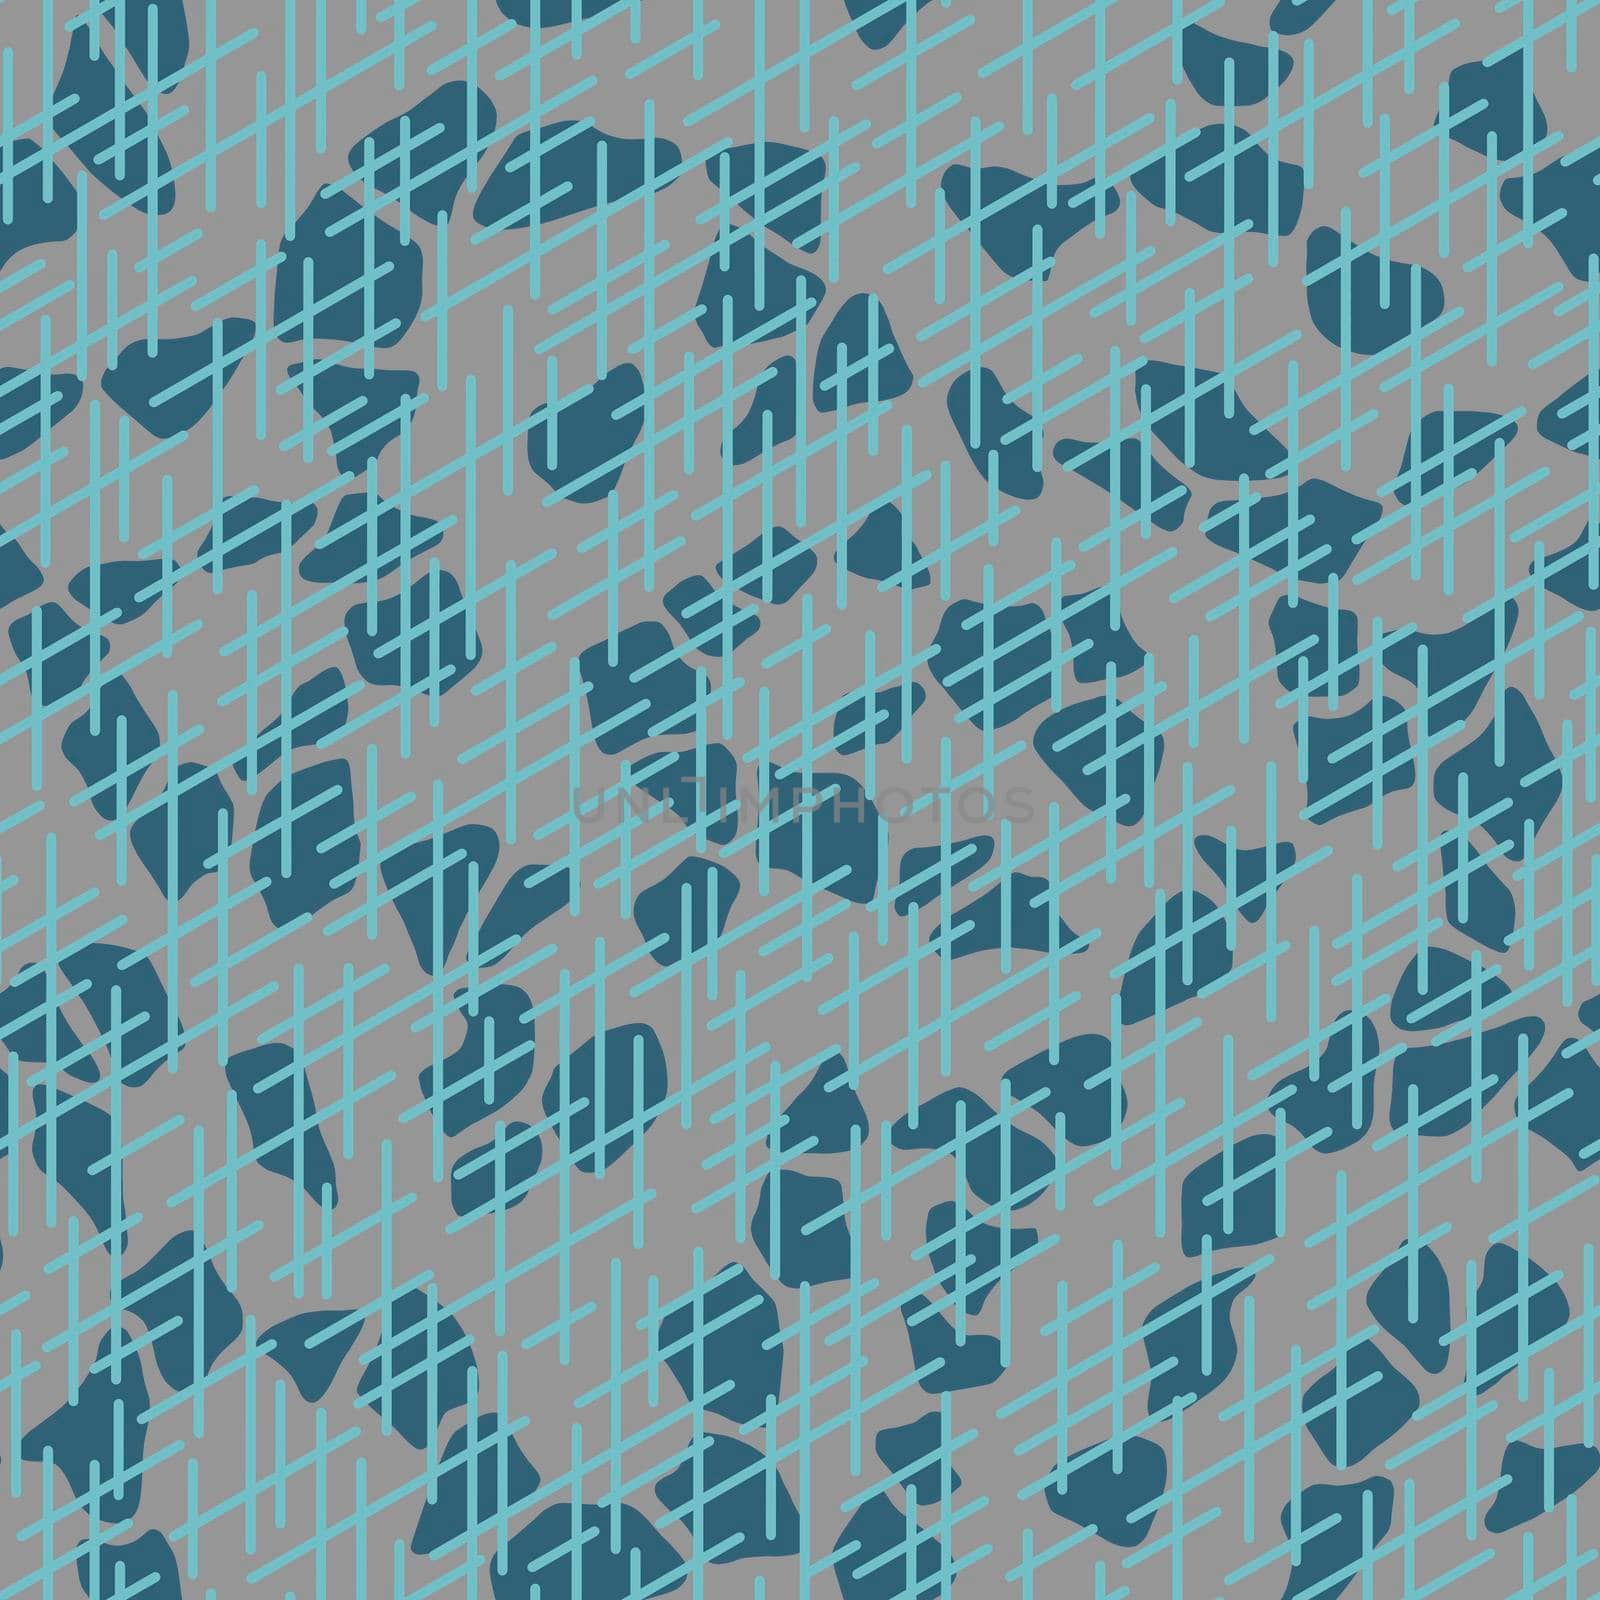 Randomly crossing lines making pattern.Chaotic short lines seamless pattern,chips and sticks modern repeatable motif.Good for print, textile,fabric, background, wrapping paper by Angelsmoon